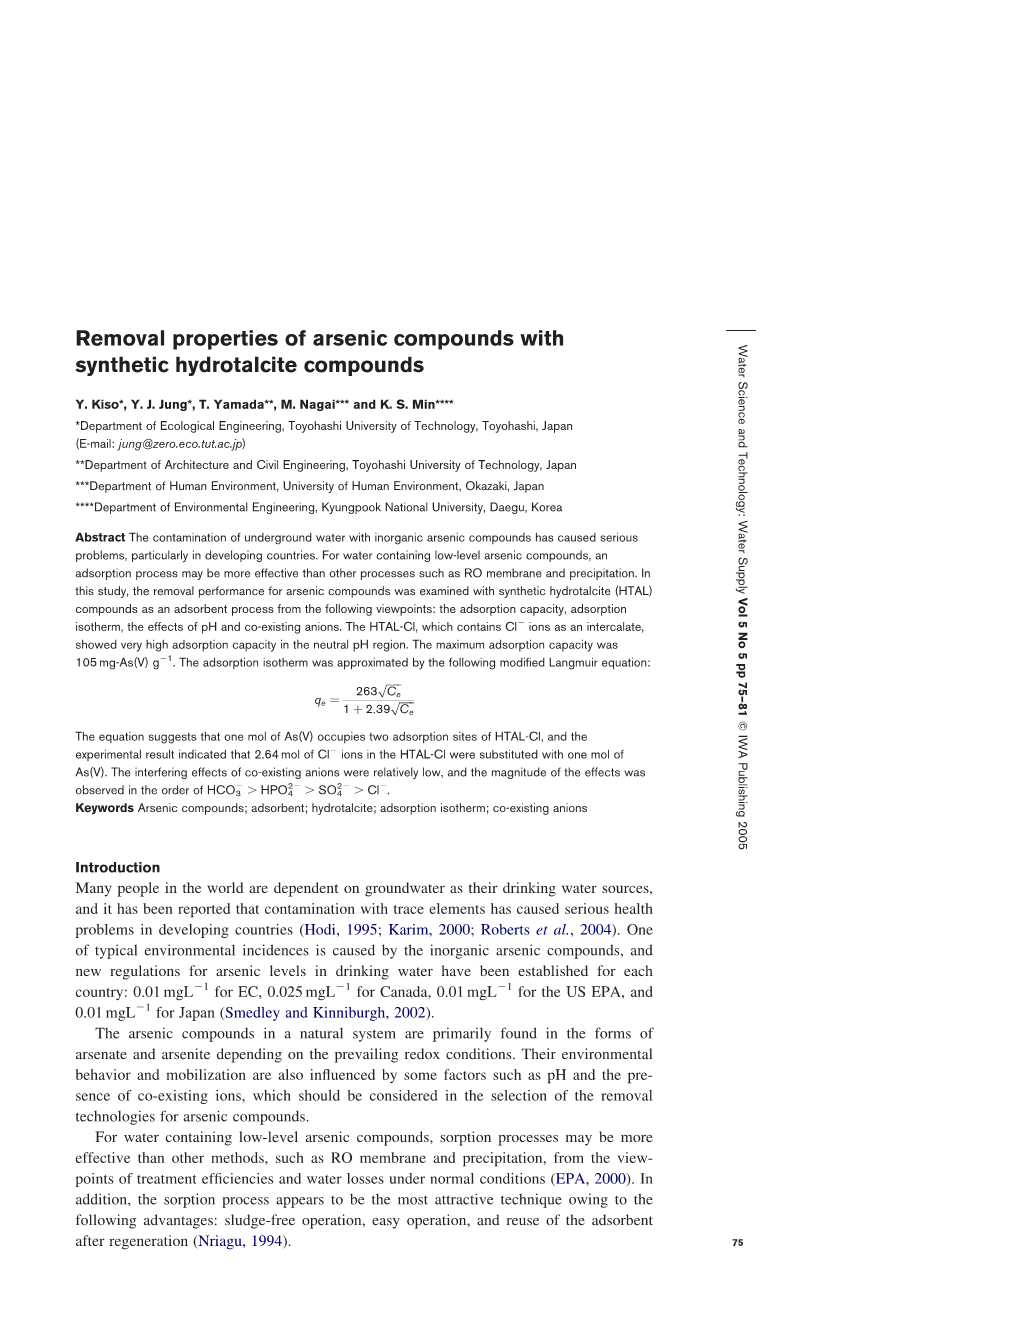 Removal Properties of Arsenic Compounds with Synthetic